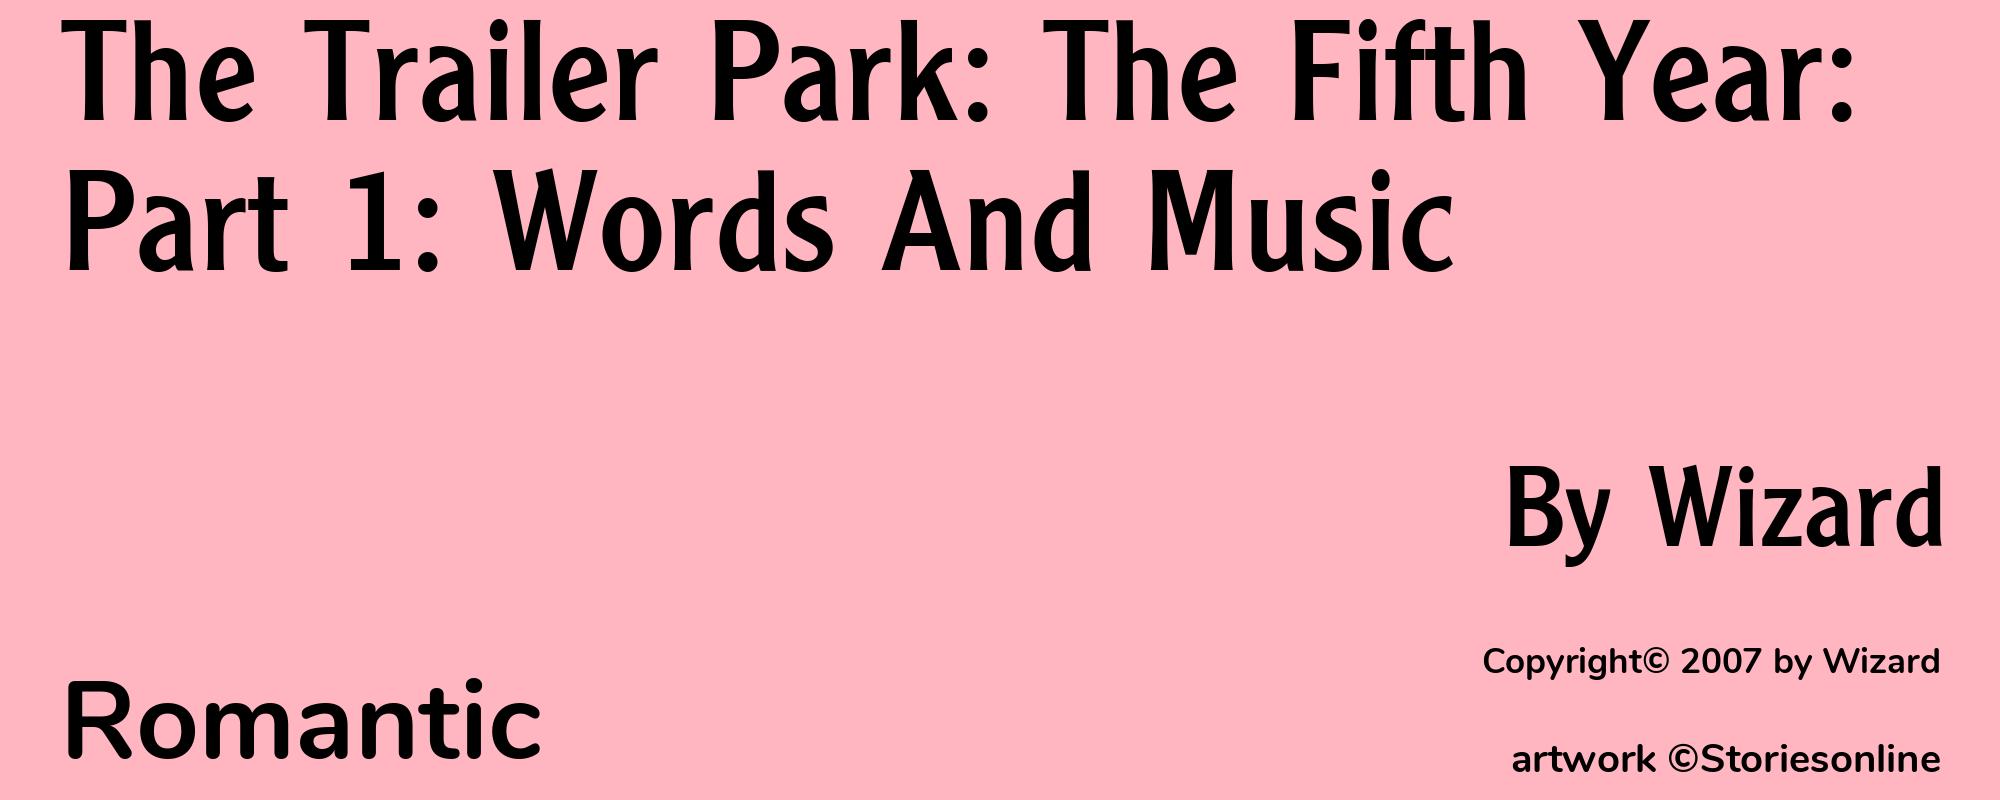 The Trailer Park: The Fifth Year: Part 1: Words And Music - Cover